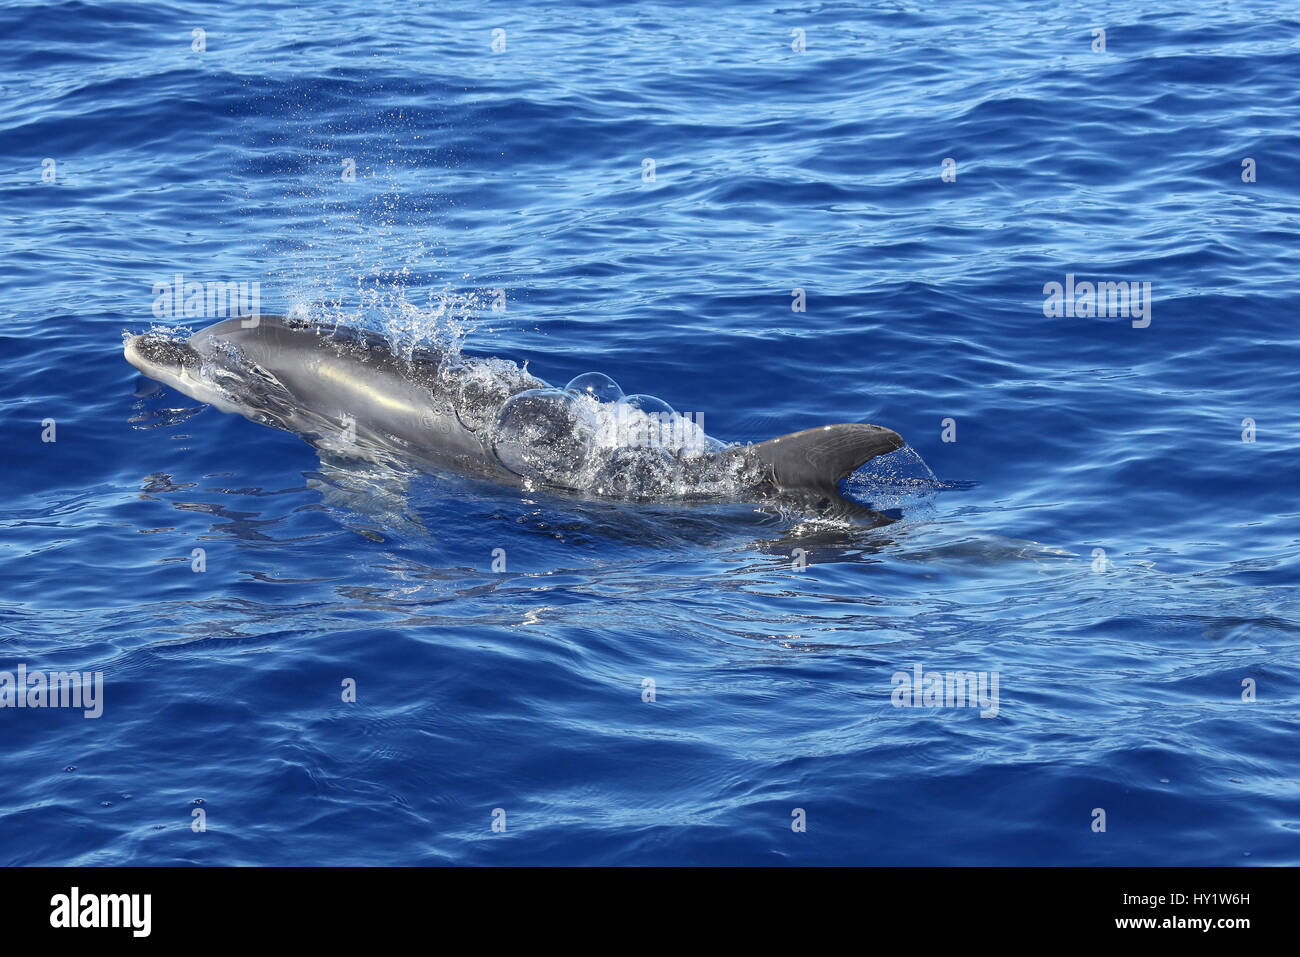 Bottle-nosed dolphin (Tursiops truncatus) at surface blowing bubbles. La Palma, Canary Islands. Stock Photo